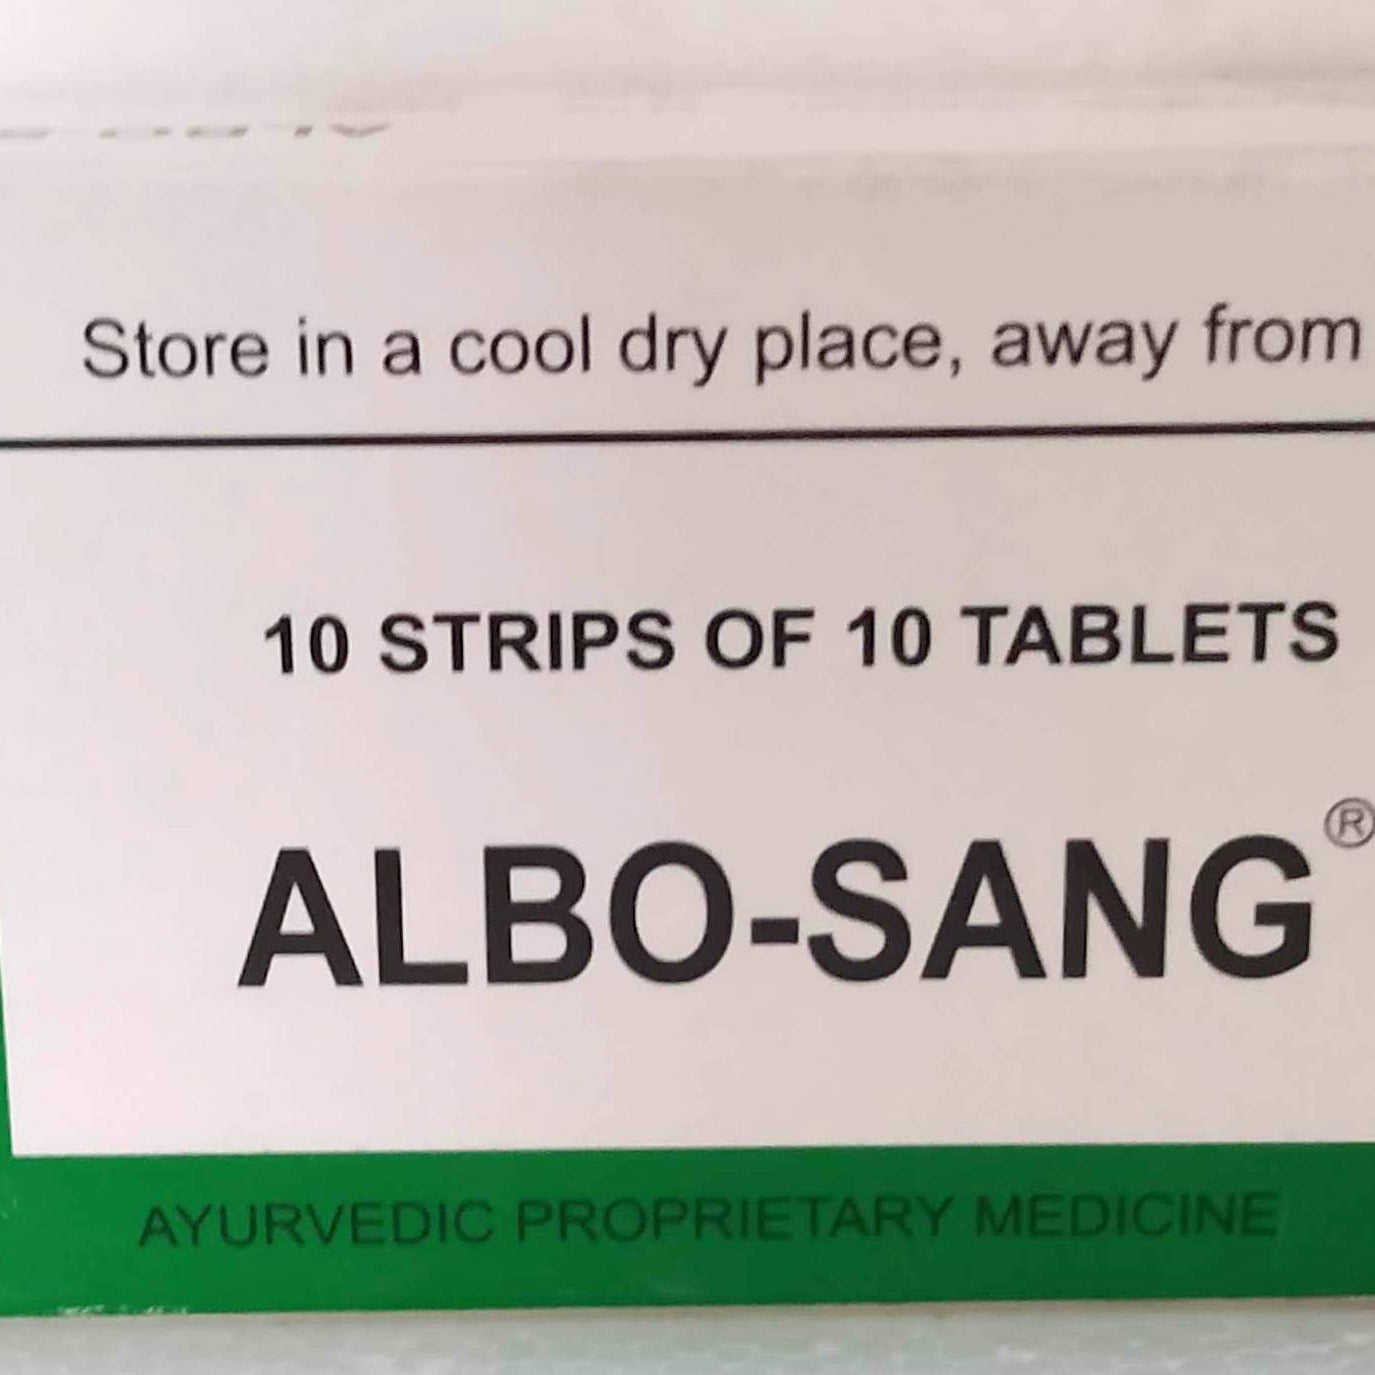 Shop Albosang 10Tablets at price 13.00 from JJ Dechane Online - Ayush Care